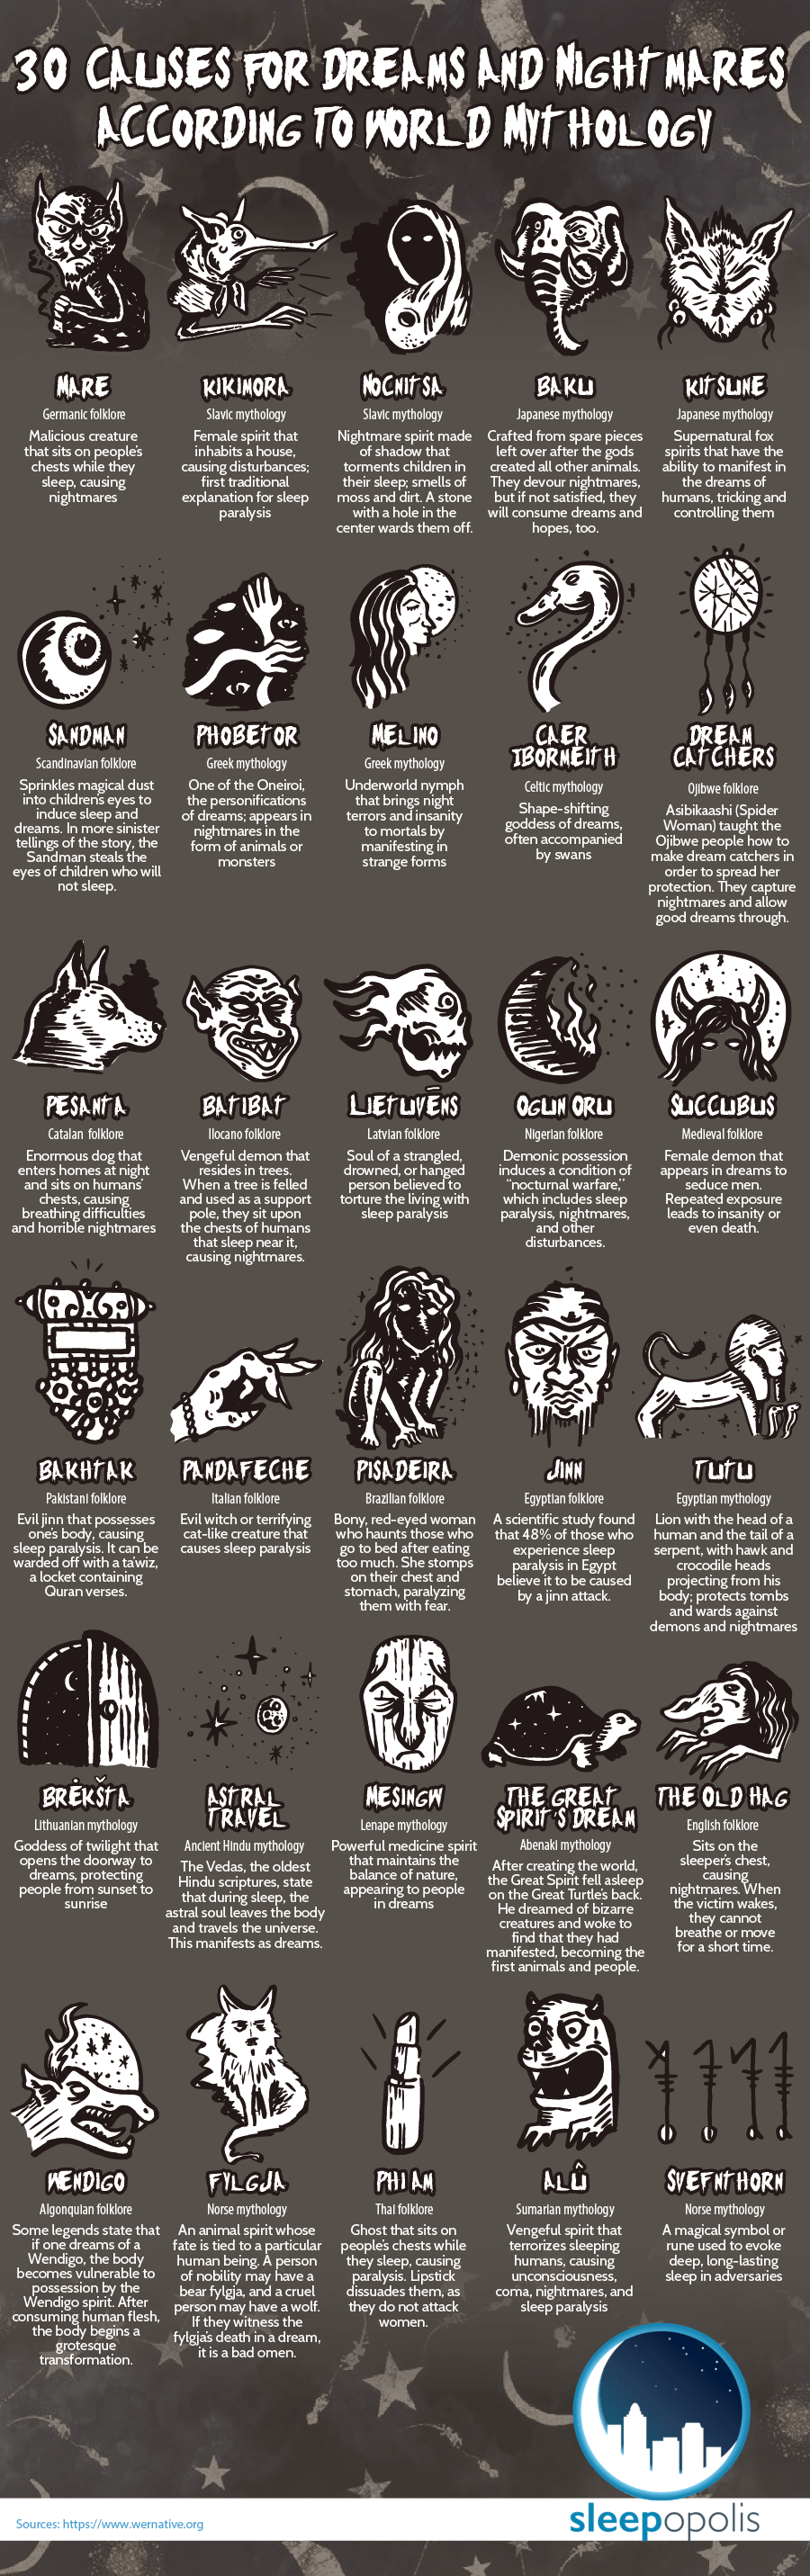 Explaining Dreams and Nightmares: 30 Mythological Stories - Infographic